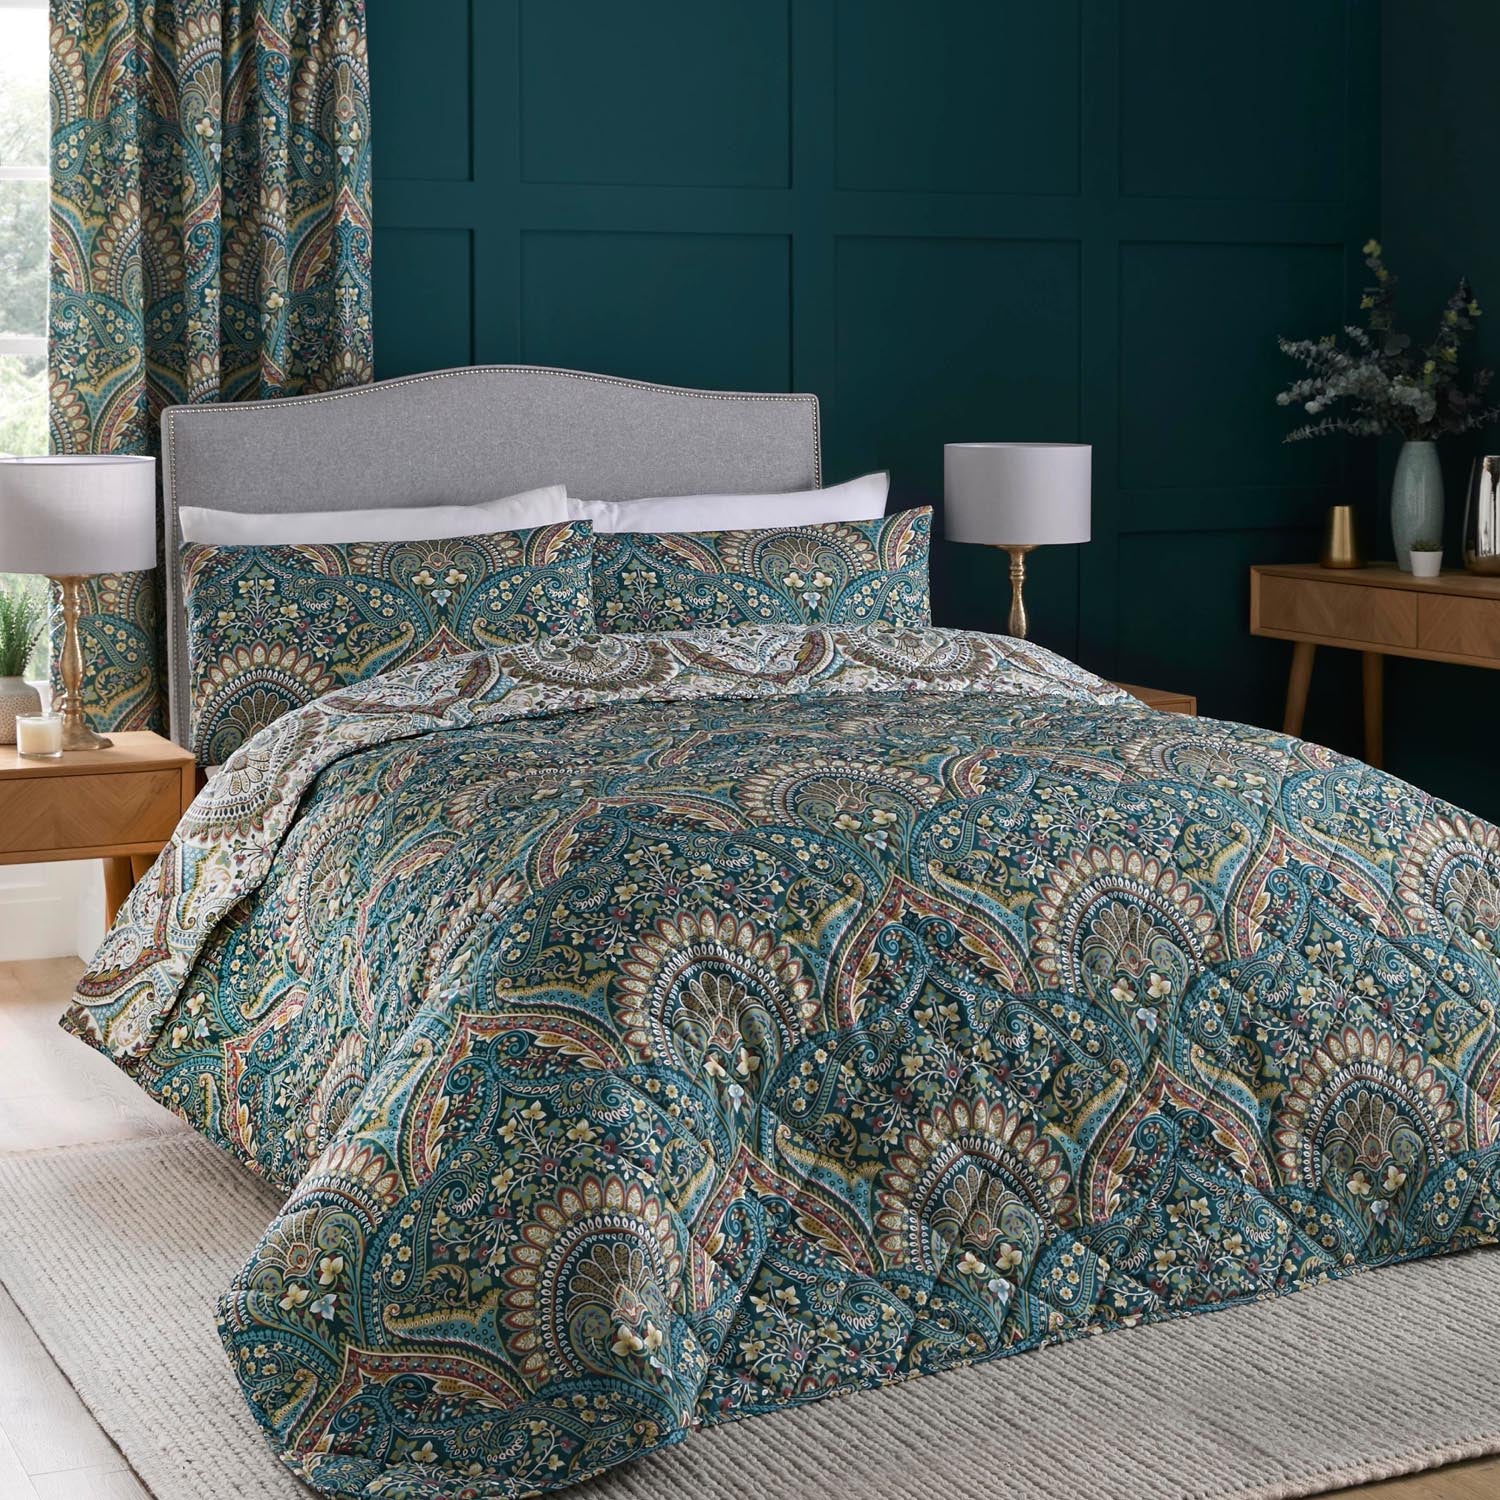 The Home Collection Palace Paisley Duvet Cover Set - Teal 2 Shaws Department Stores